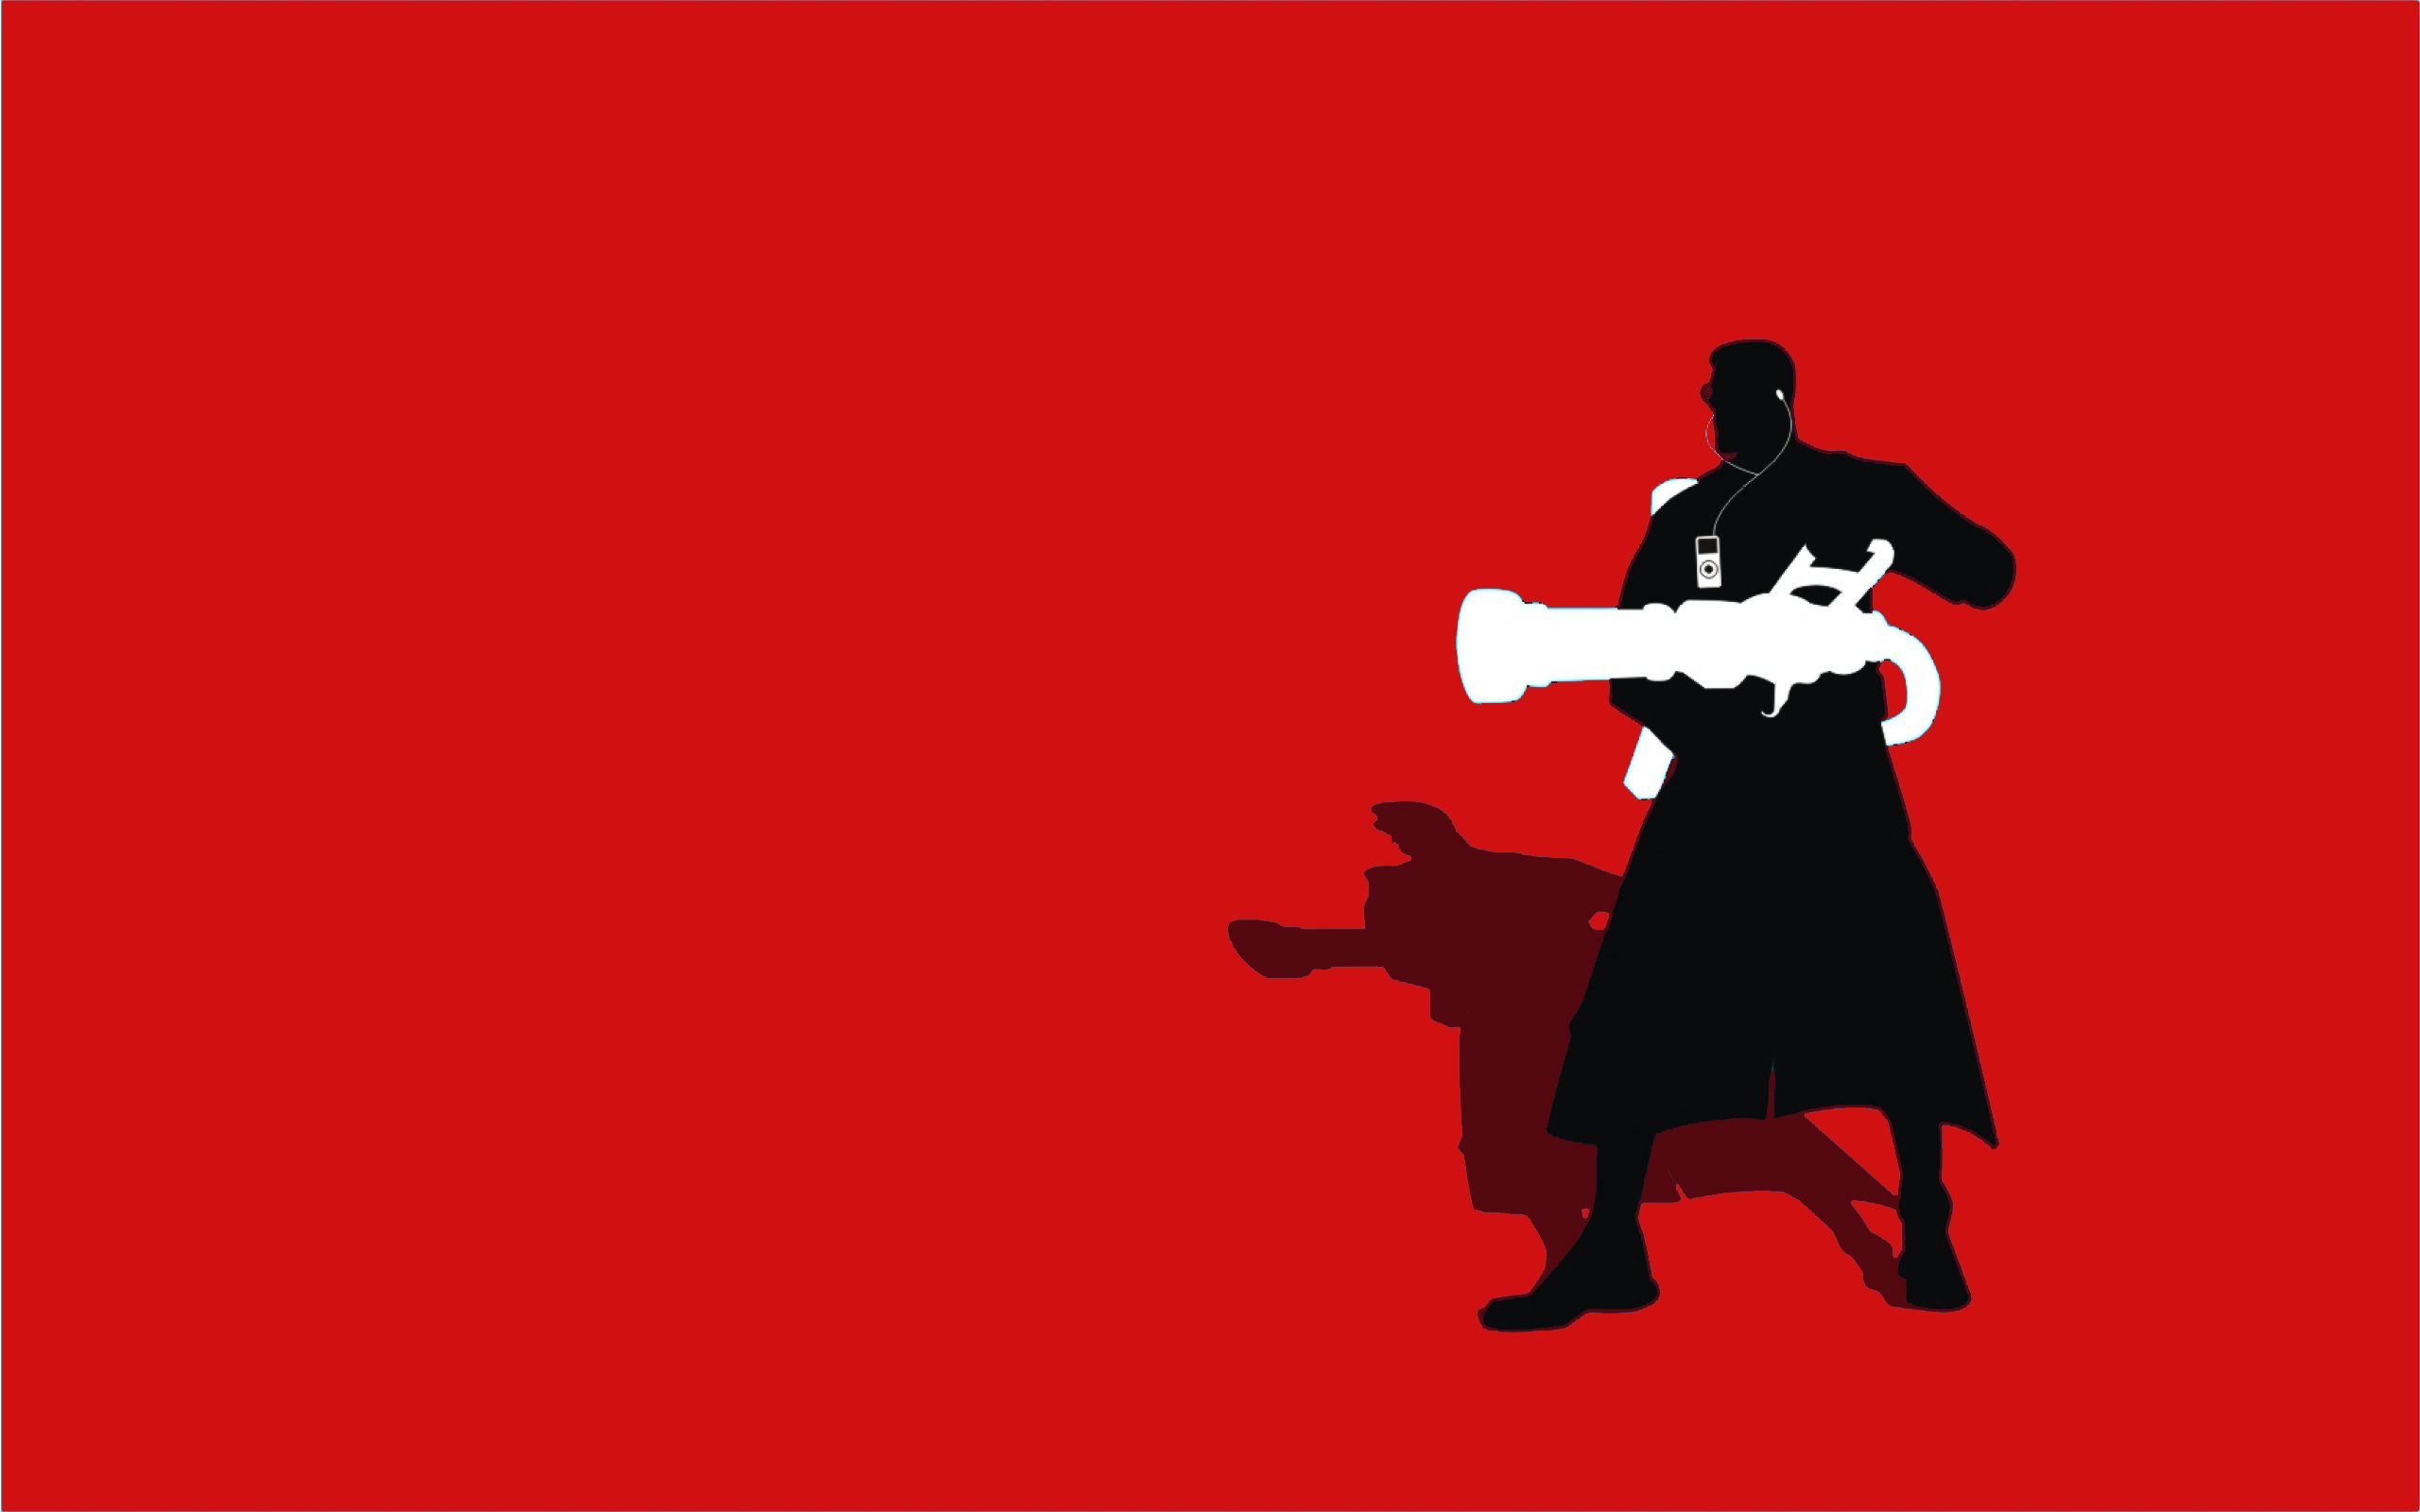 TF2 Blue Medic Silhouette iPod Earbuds 2560x1600 by cwegrecki on ...